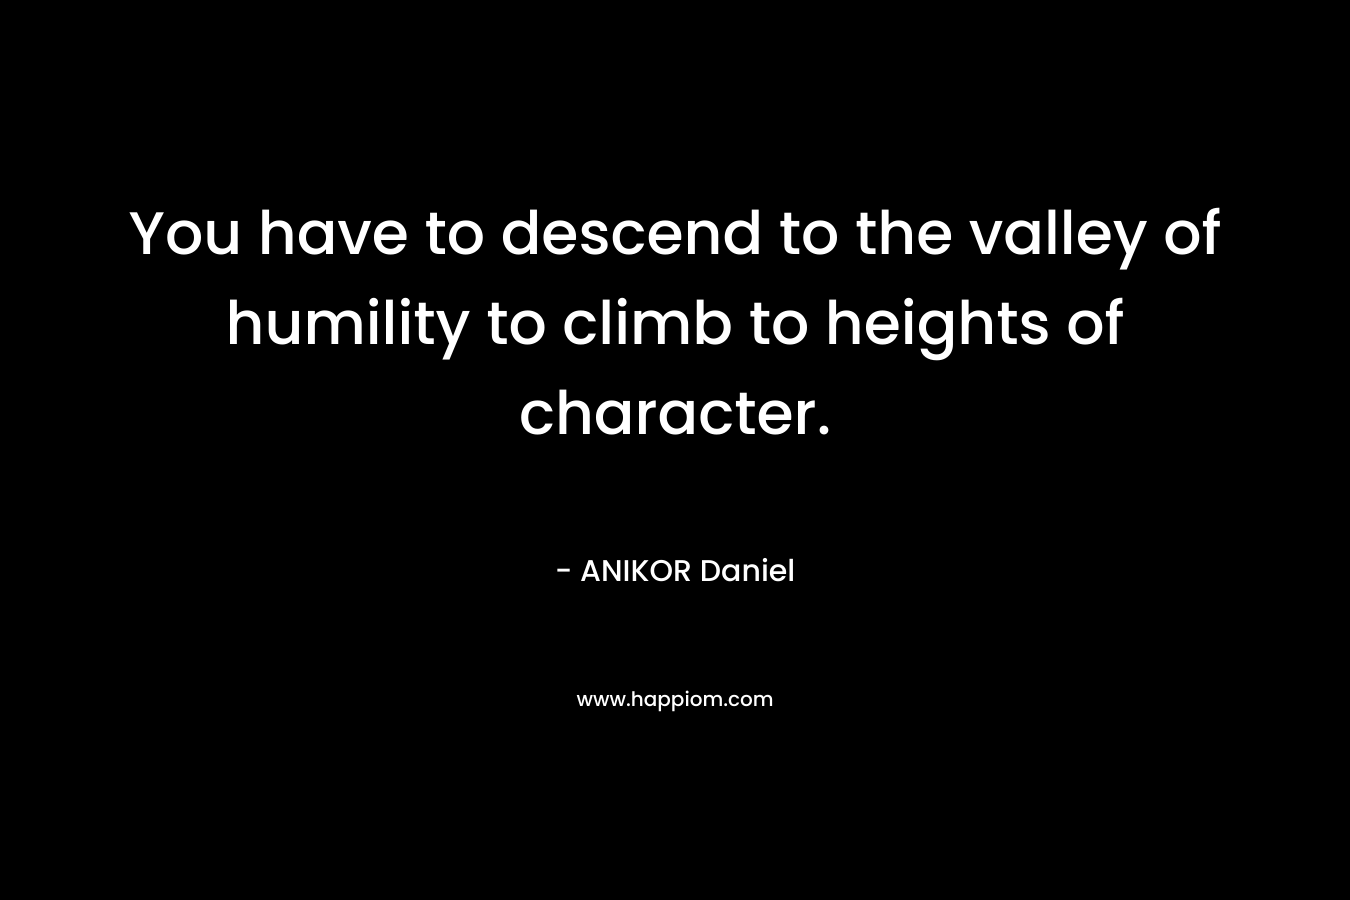 You have to descend to the valley of humility to climb to heights of character. – ANIKOR Daniel